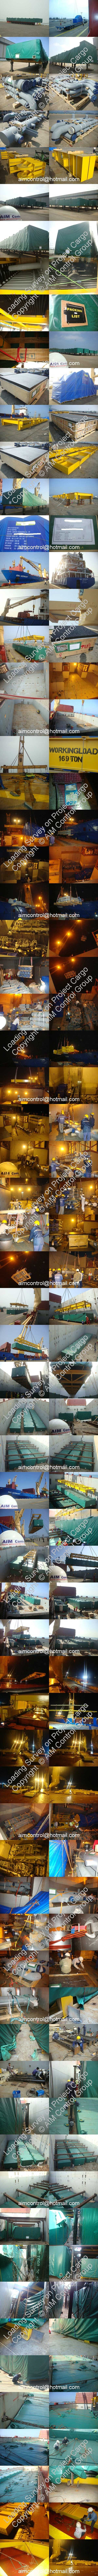 Heavy_lift_project_cargo_inspection_in_Dung_quoc_ports - - AIM_Control_marine_warranty_surveyor